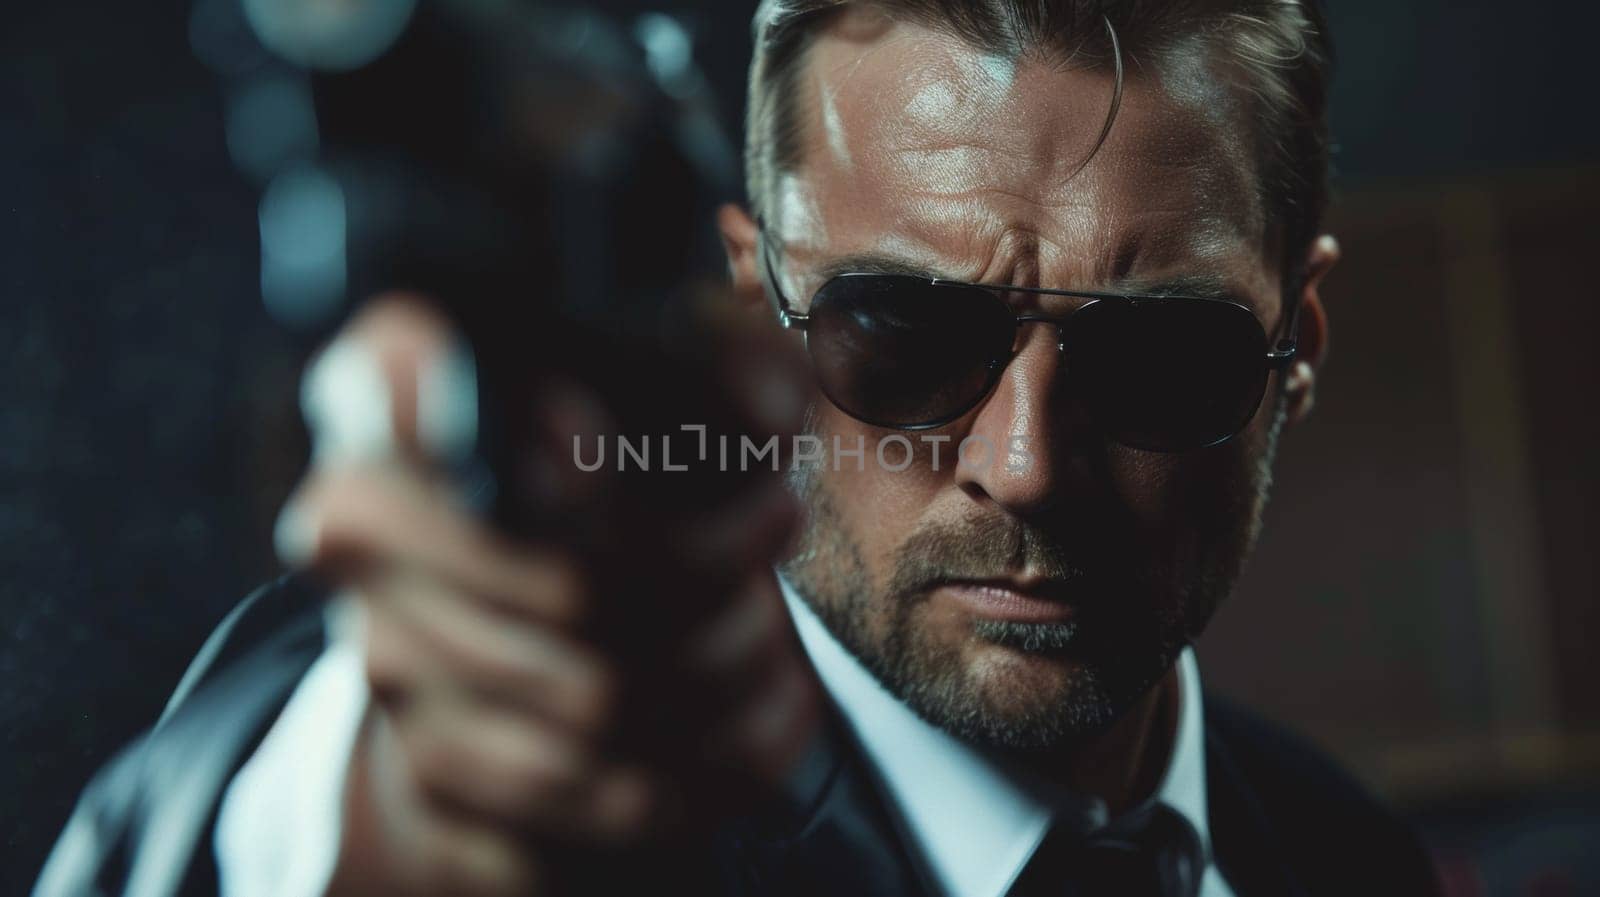 A man in sunglasses and a suit holding up his gun